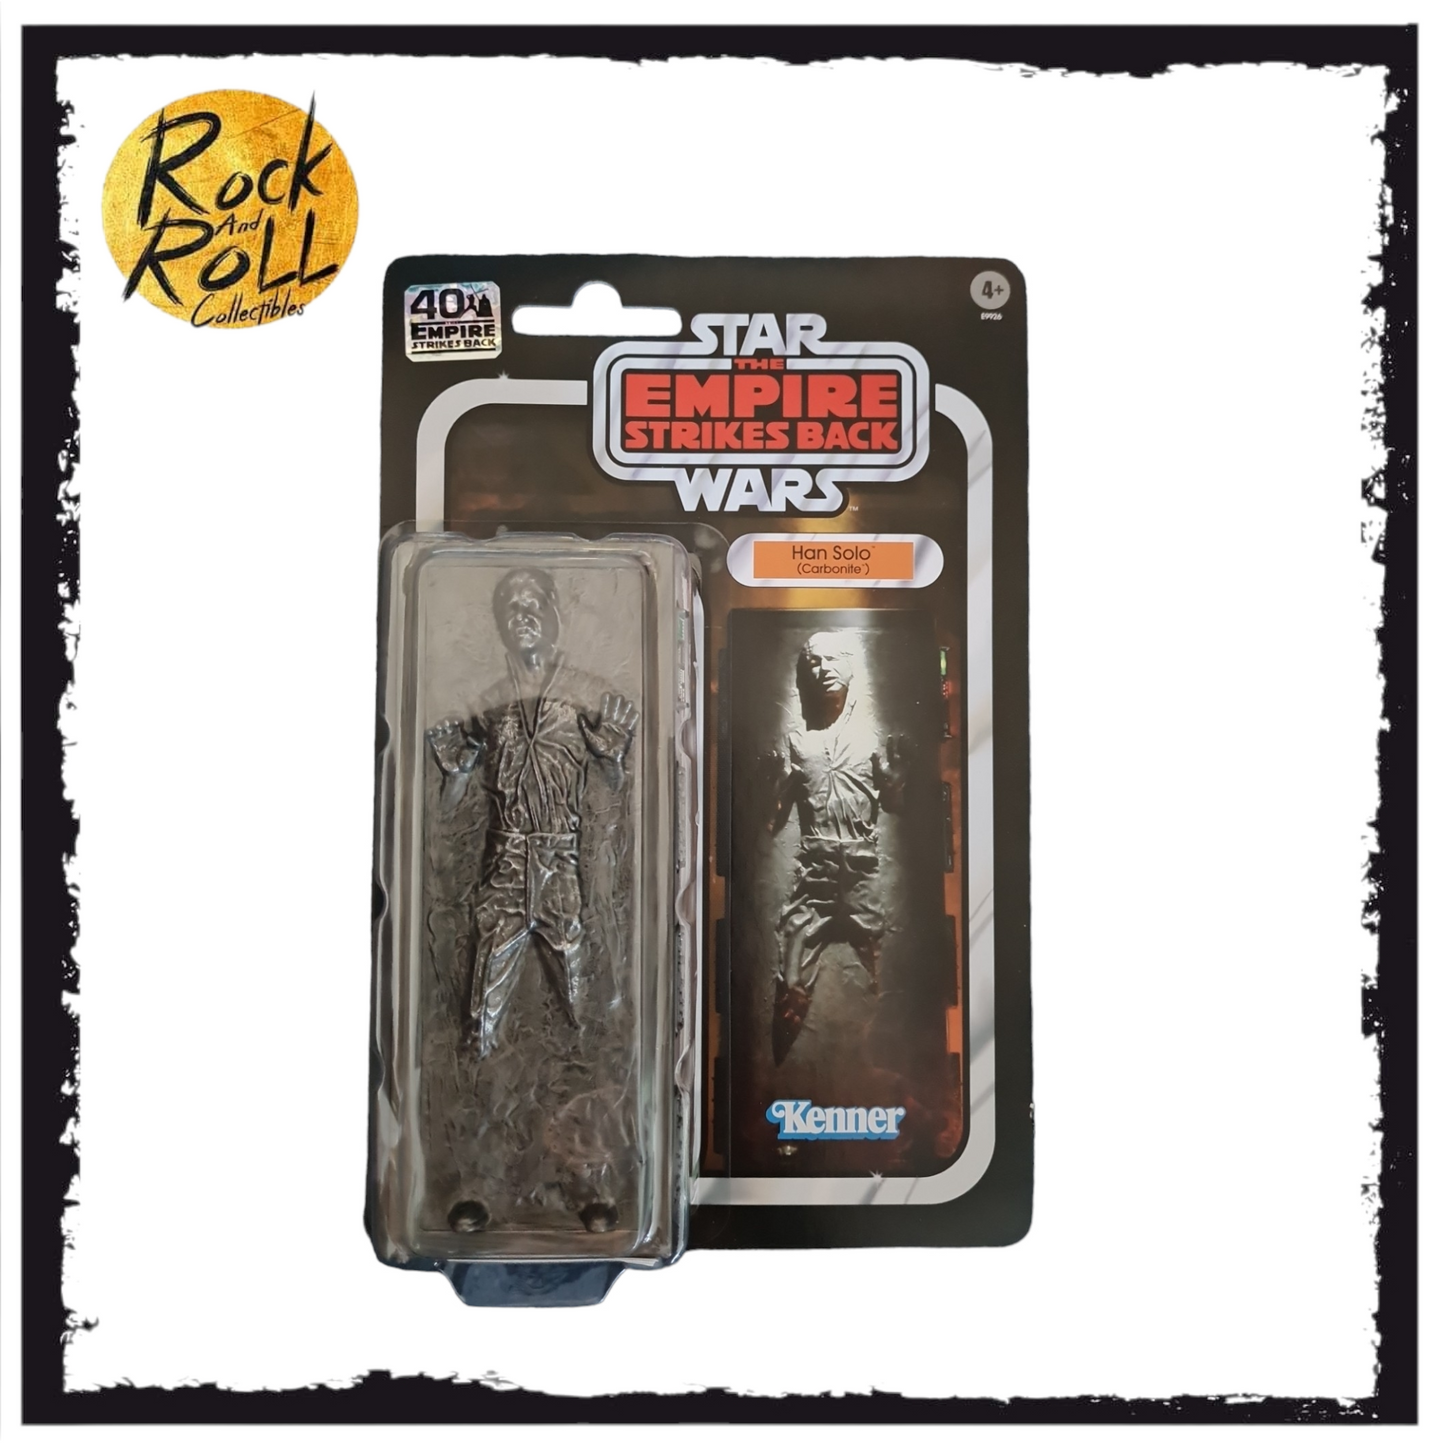 Star Wars - The Empire Strikes Back - Han Solo (Carbonite) Kenner Action Figure - 40th Anniversary